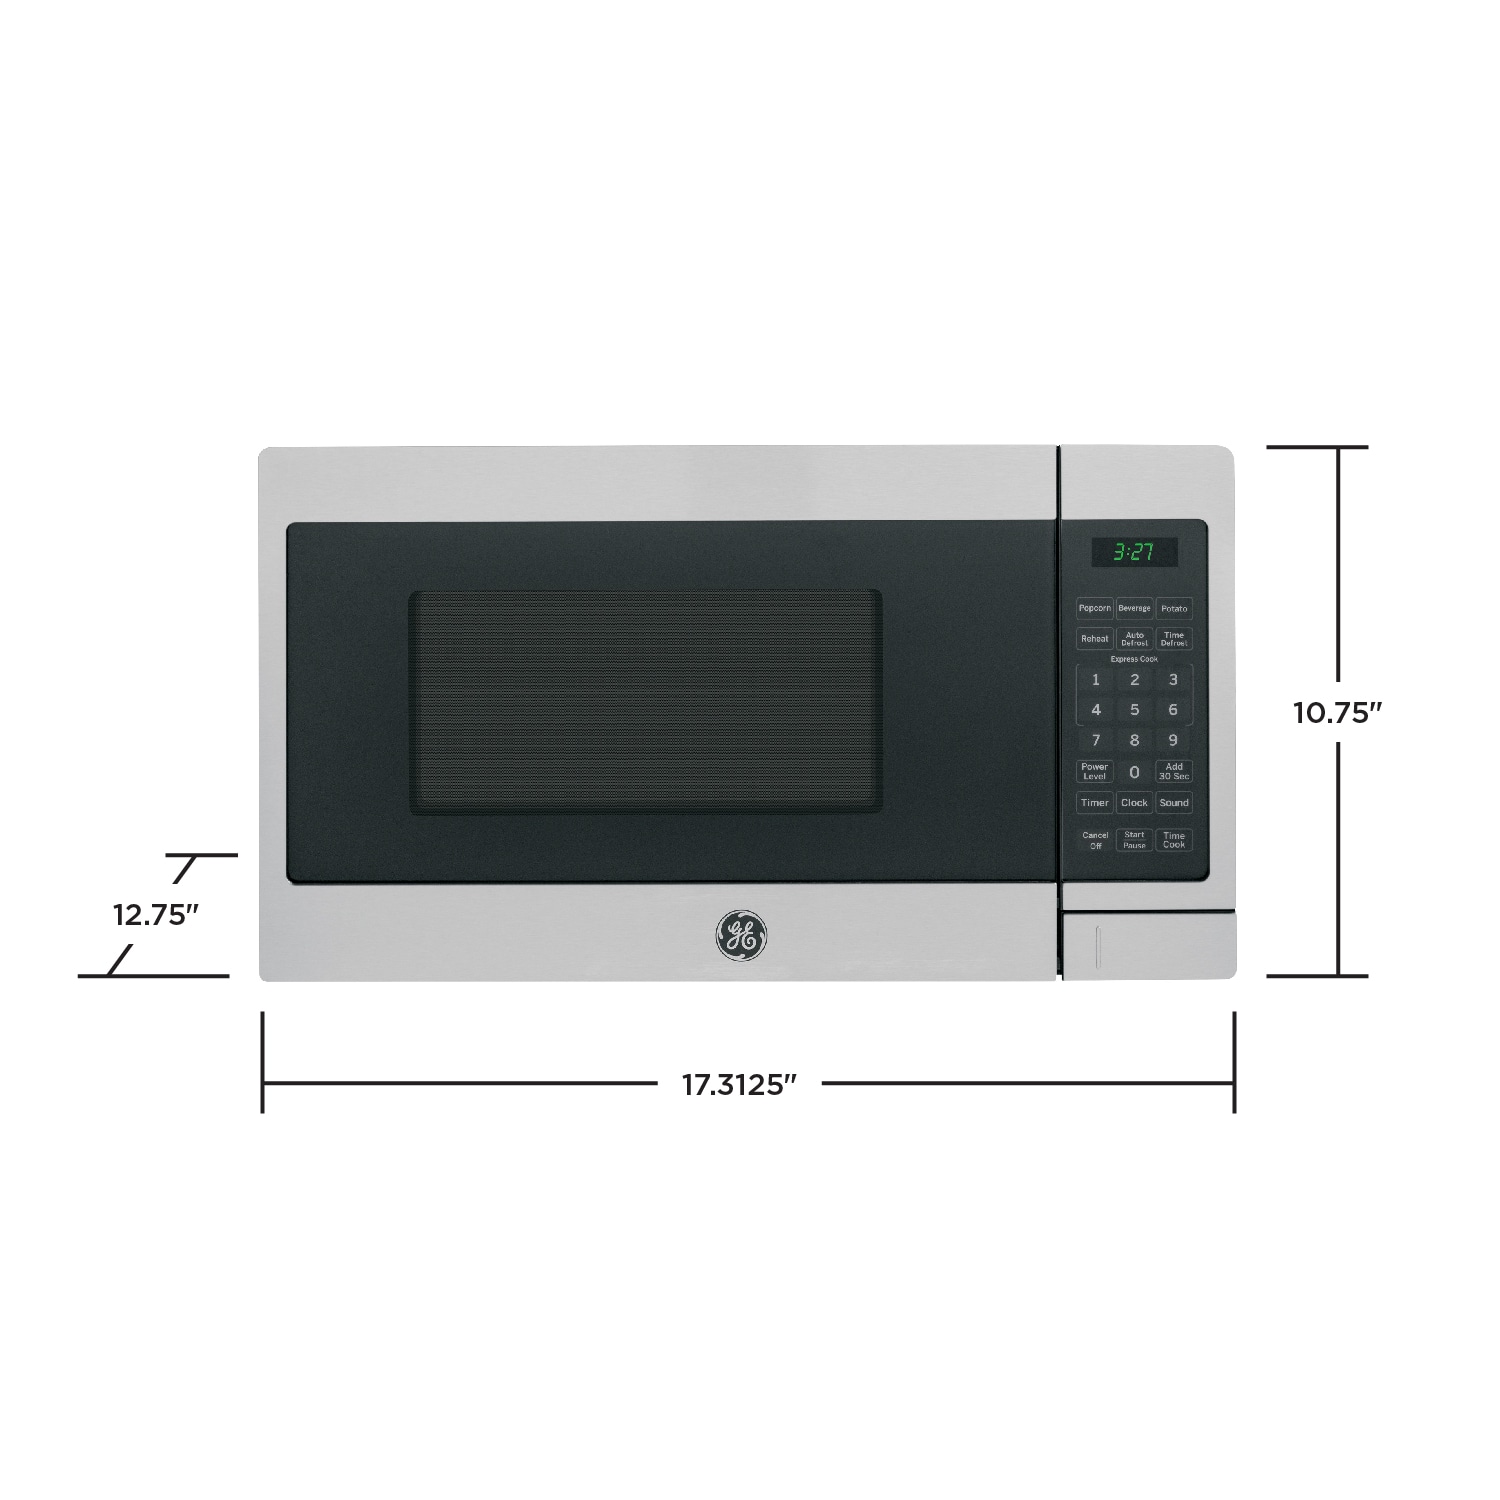 JEM3072DHBB by GE Appliances - GE® 0.7 Cu. Ft. Spacemaker® Countertop  Microwave Oven